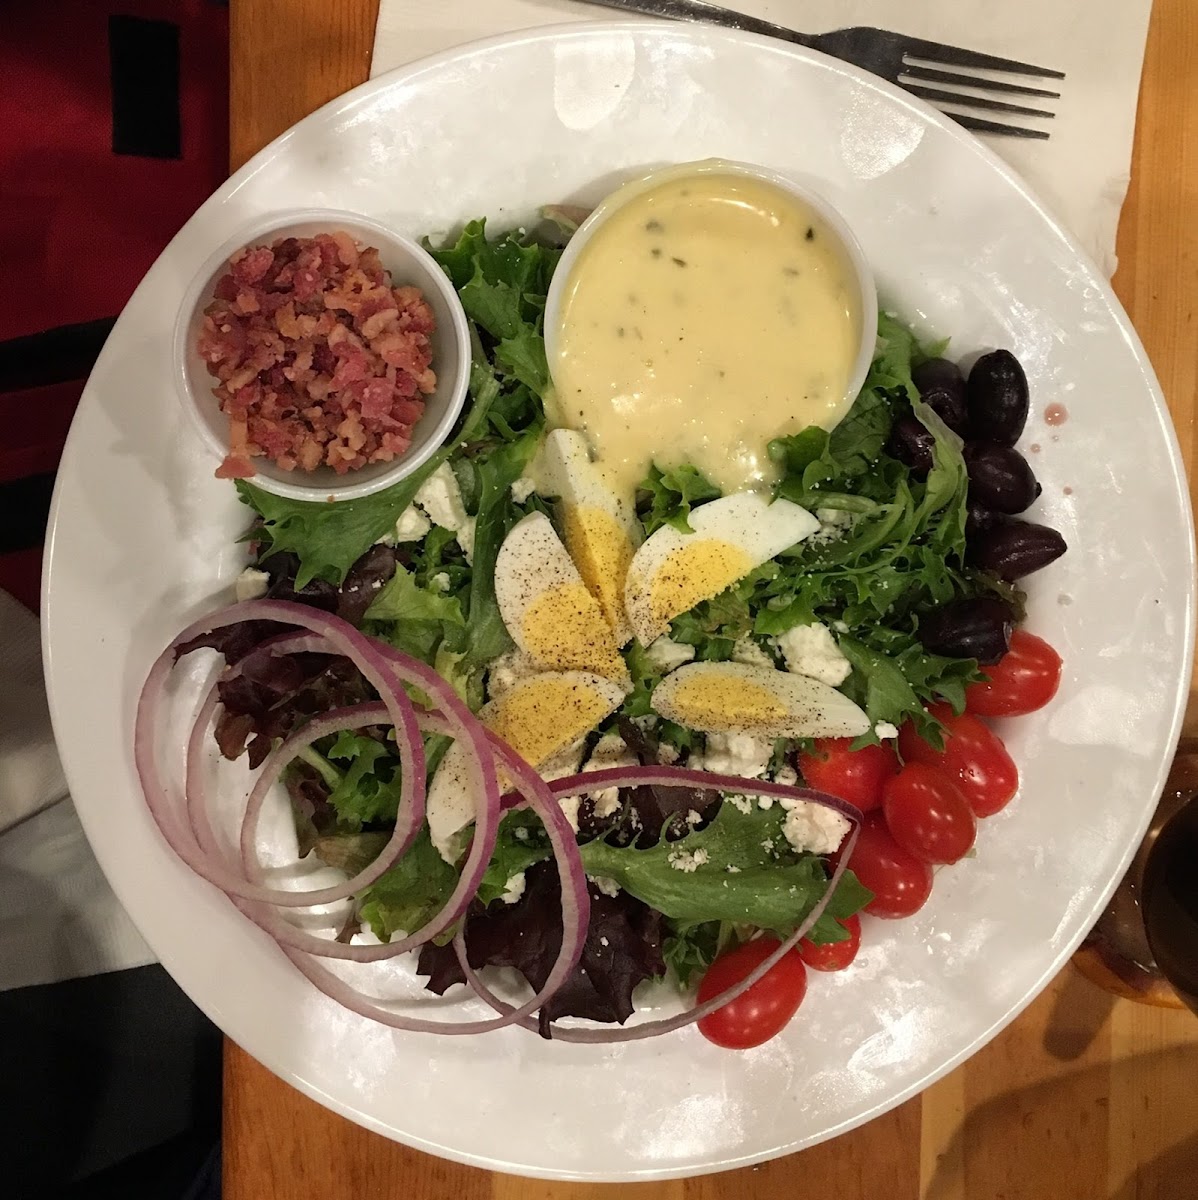 Gustav’s Salad: Greens with tomato, olives, bacon, red onion, blue cheese crumbles  and egg with Honey Mustard Dressing.